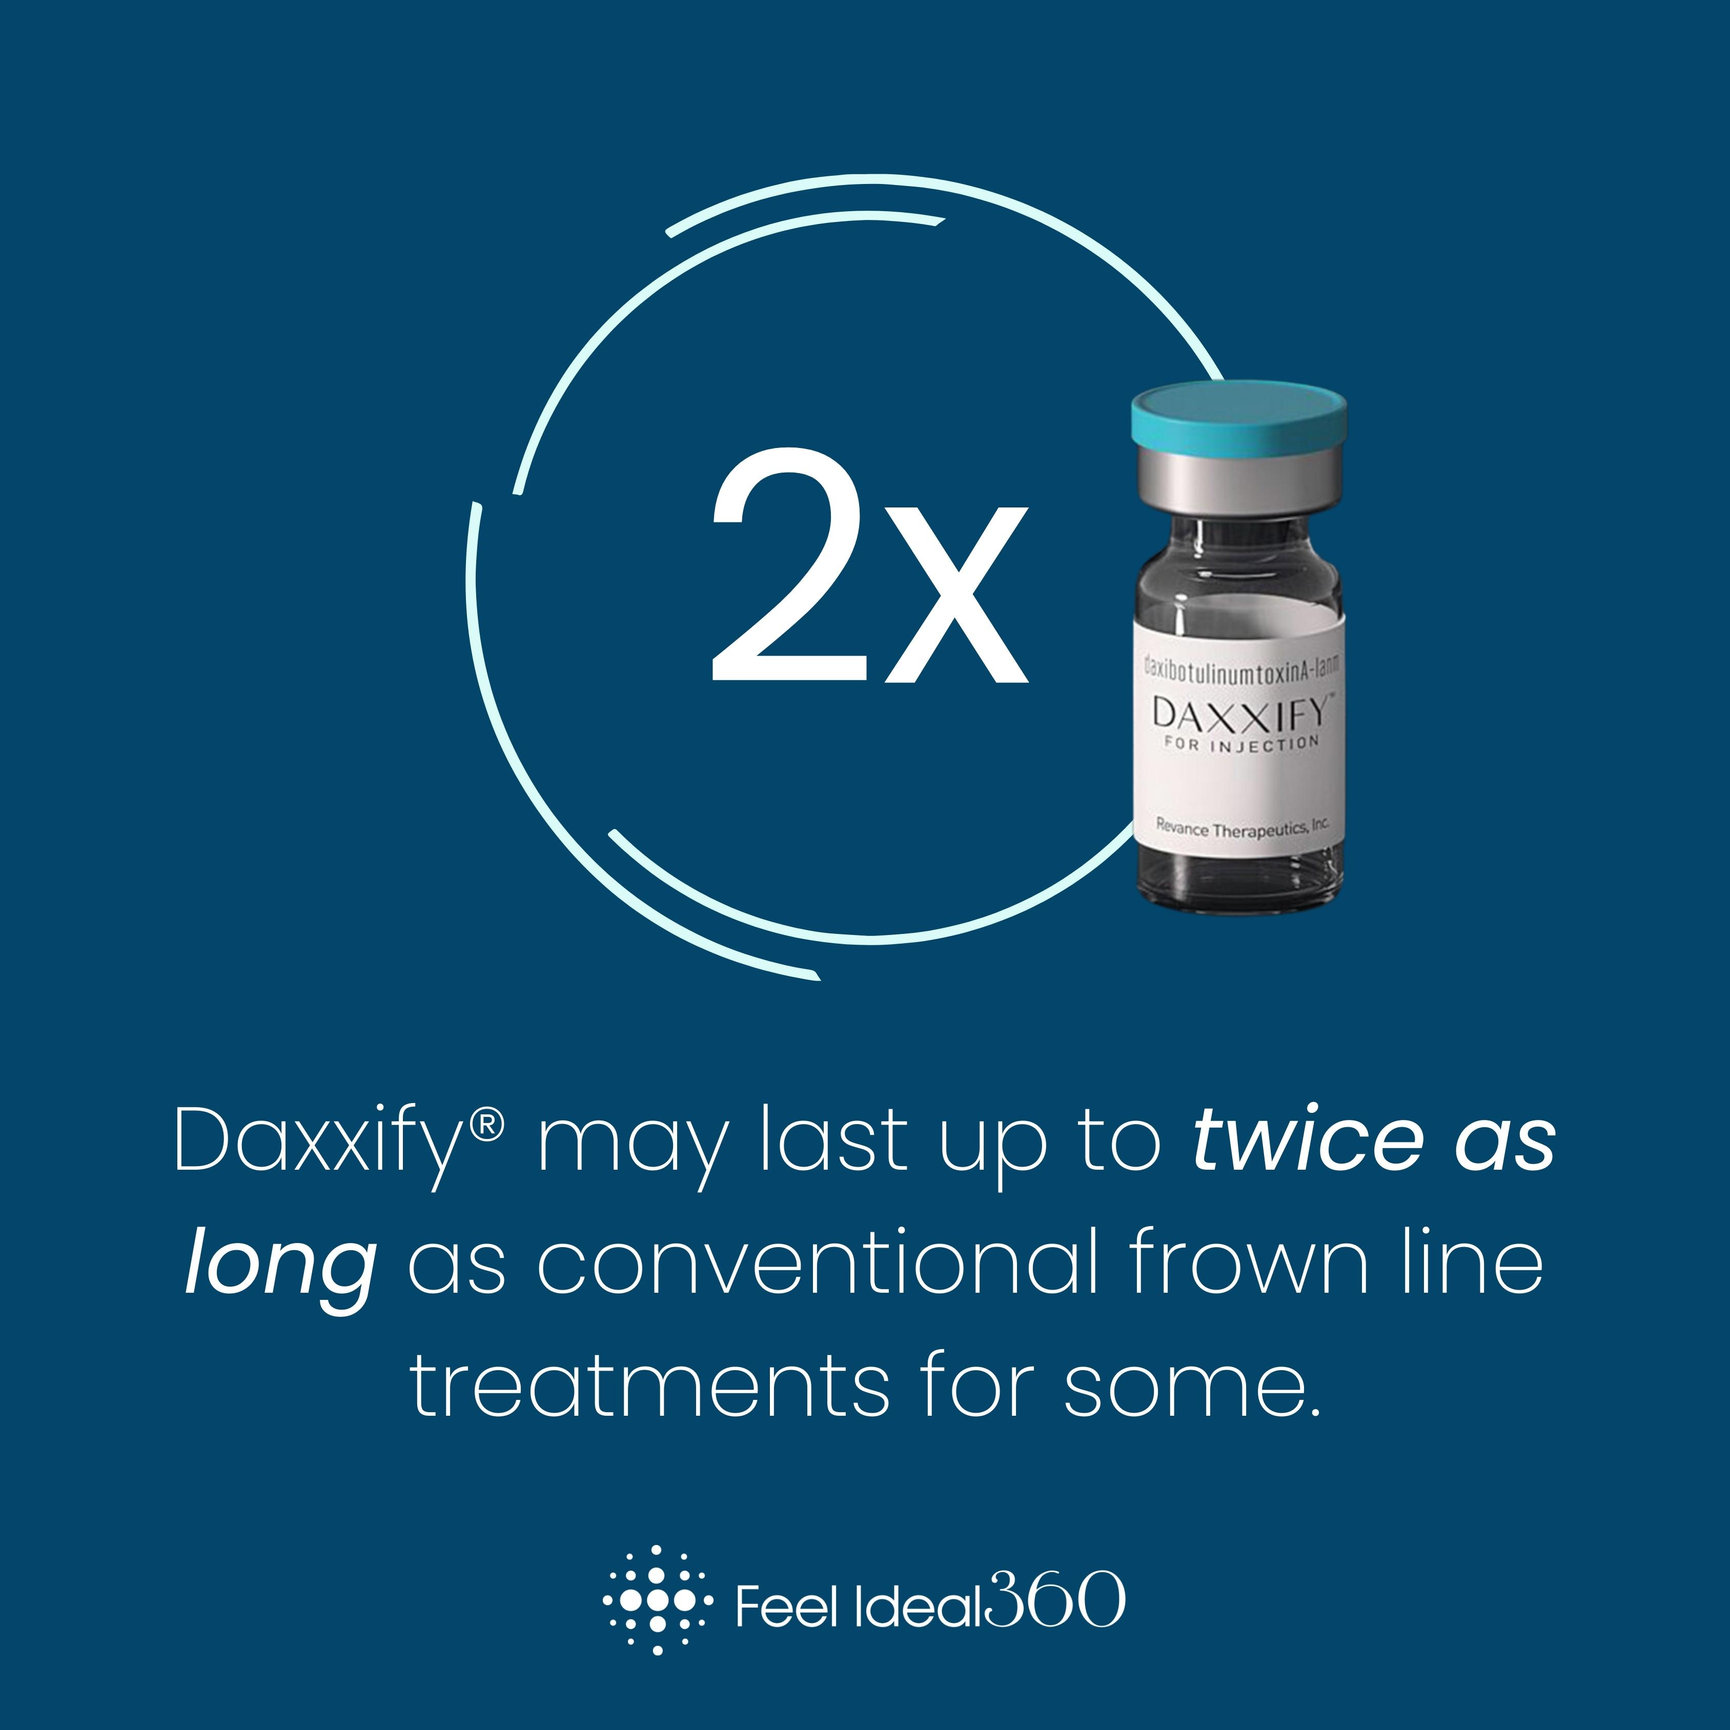 Feel Ideal 360 Offers Daxxify® Which Last Longer Than Conventional Frown Line Treatments 9882